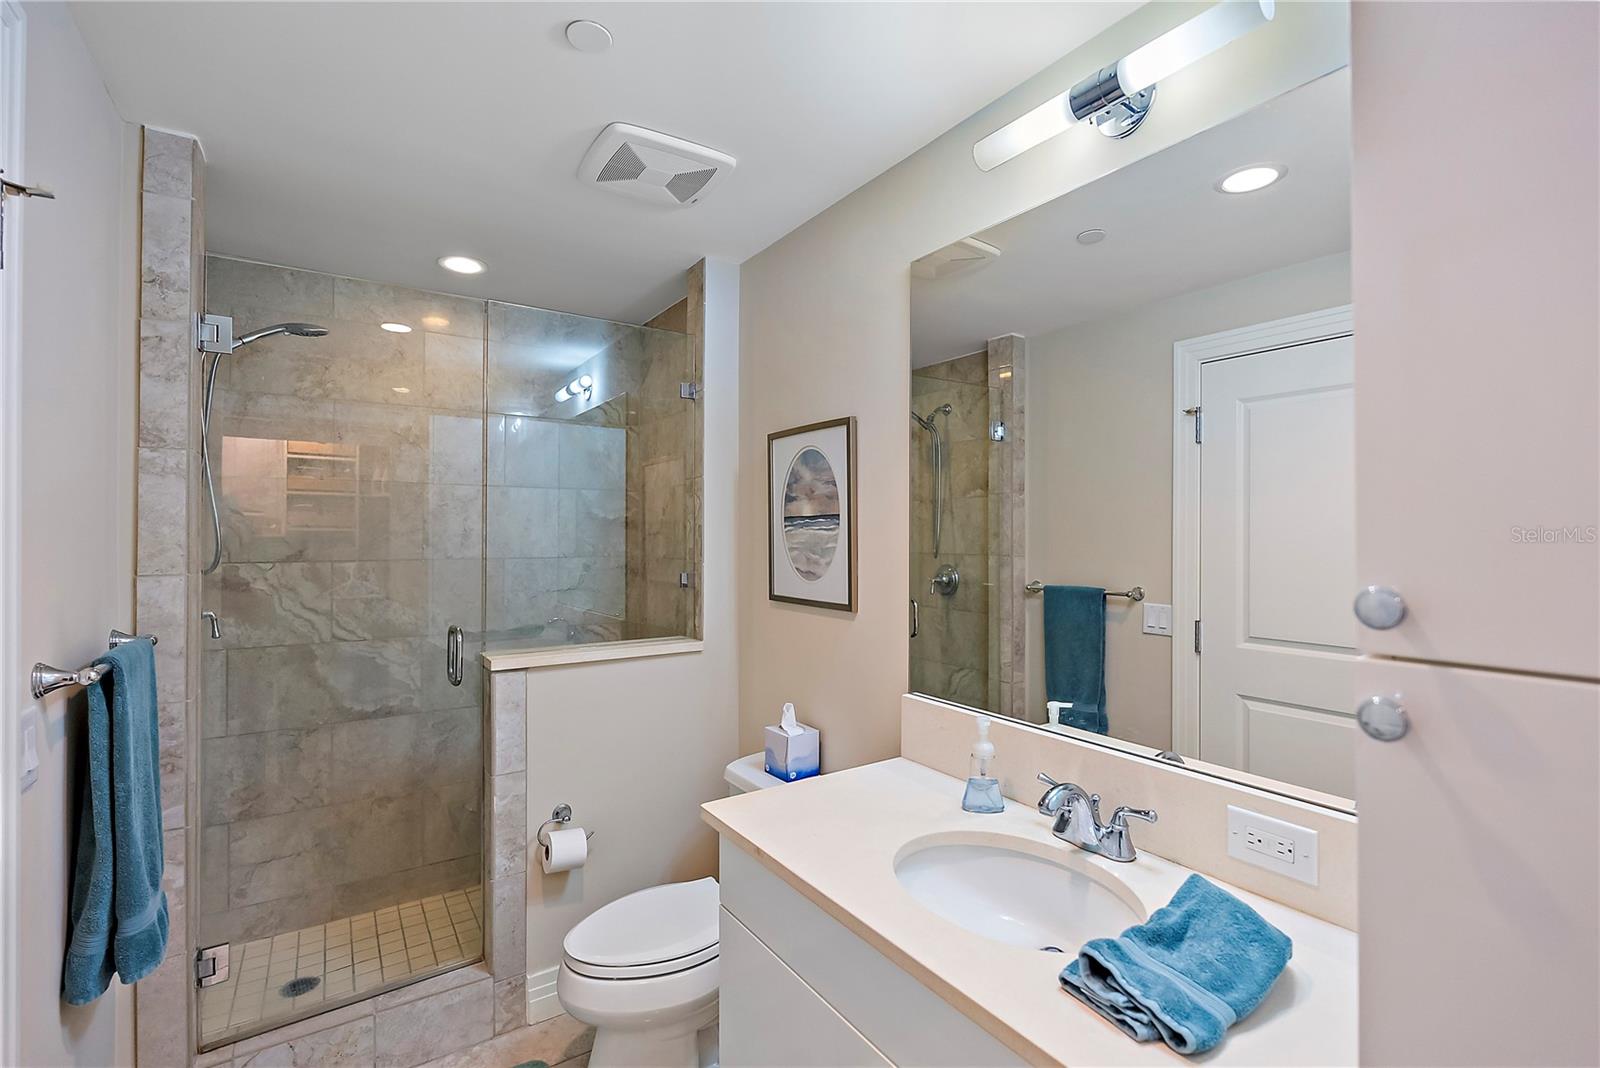 Guest Bath which can be accessed directly through Guest Bedroom or hallway.